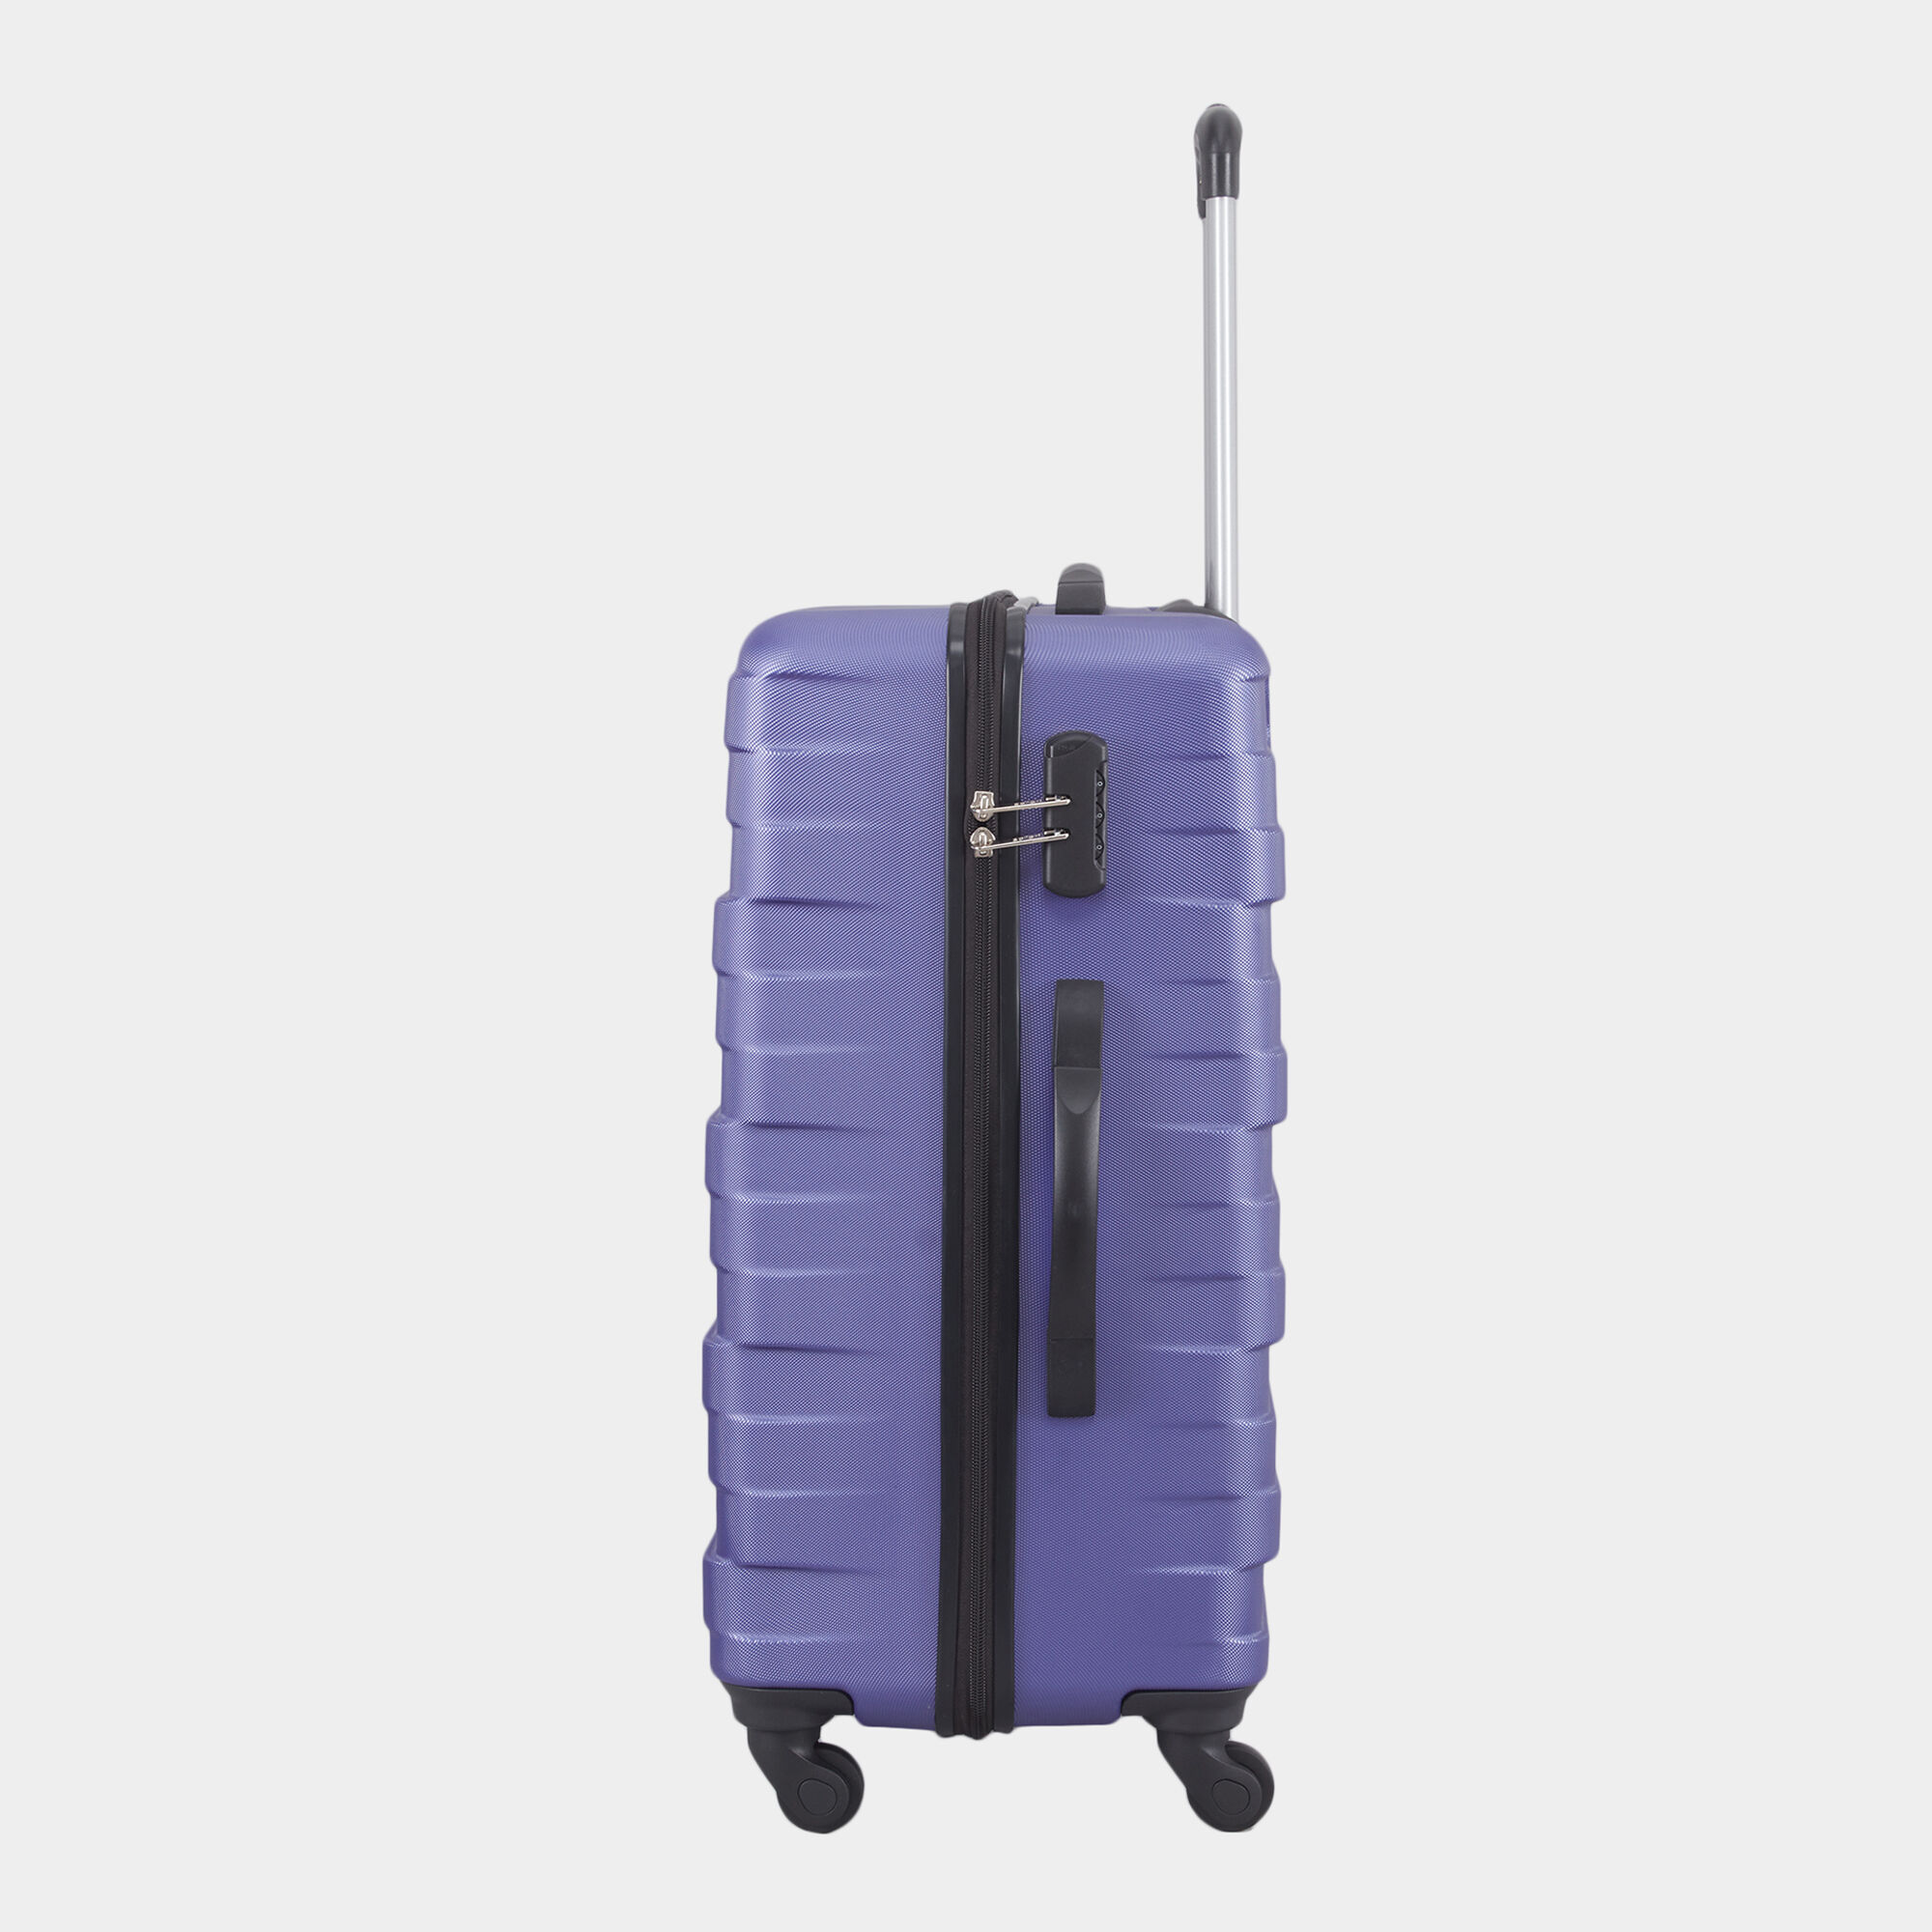 Big Luggage Trolley Bags | Luggage Bags Large Size